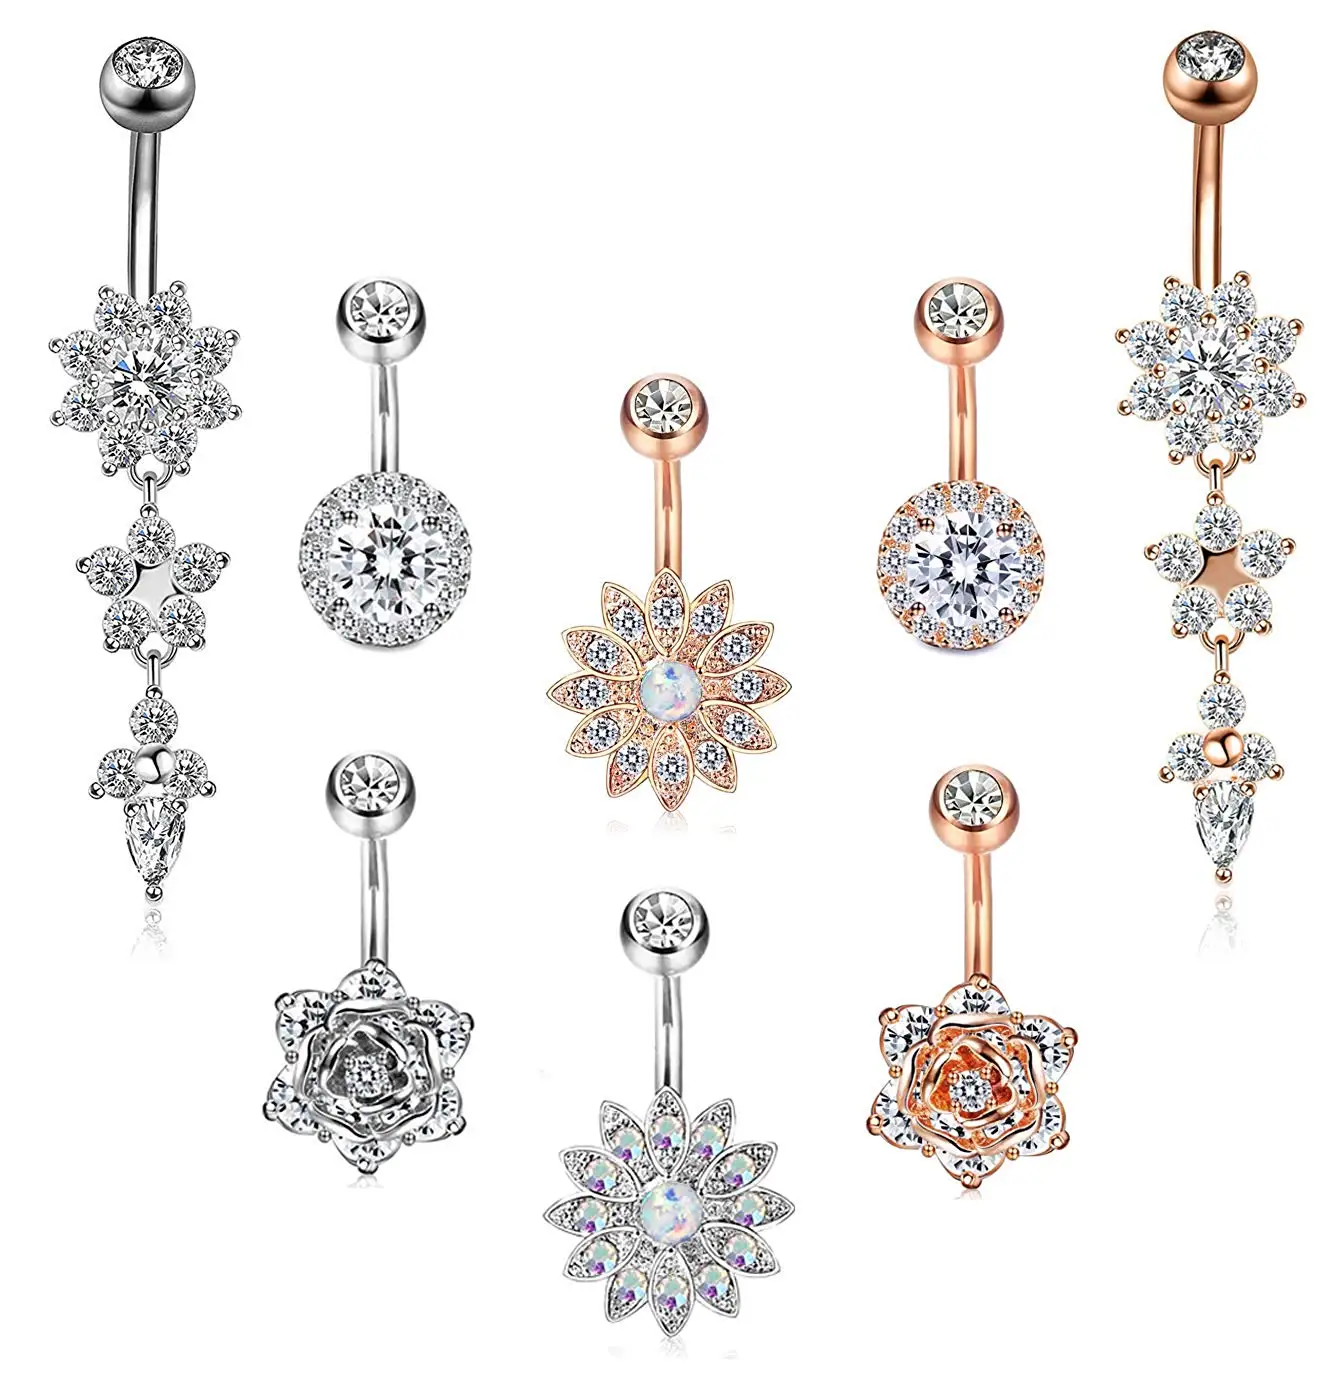 BodyBonita 8pcs Belly Button Rings Dangle 316L Stainless Steel Belly Navel Rings Curved Barbell CZ Gold Rose Gold Body Piercing Jewelry for Women Men 14G 